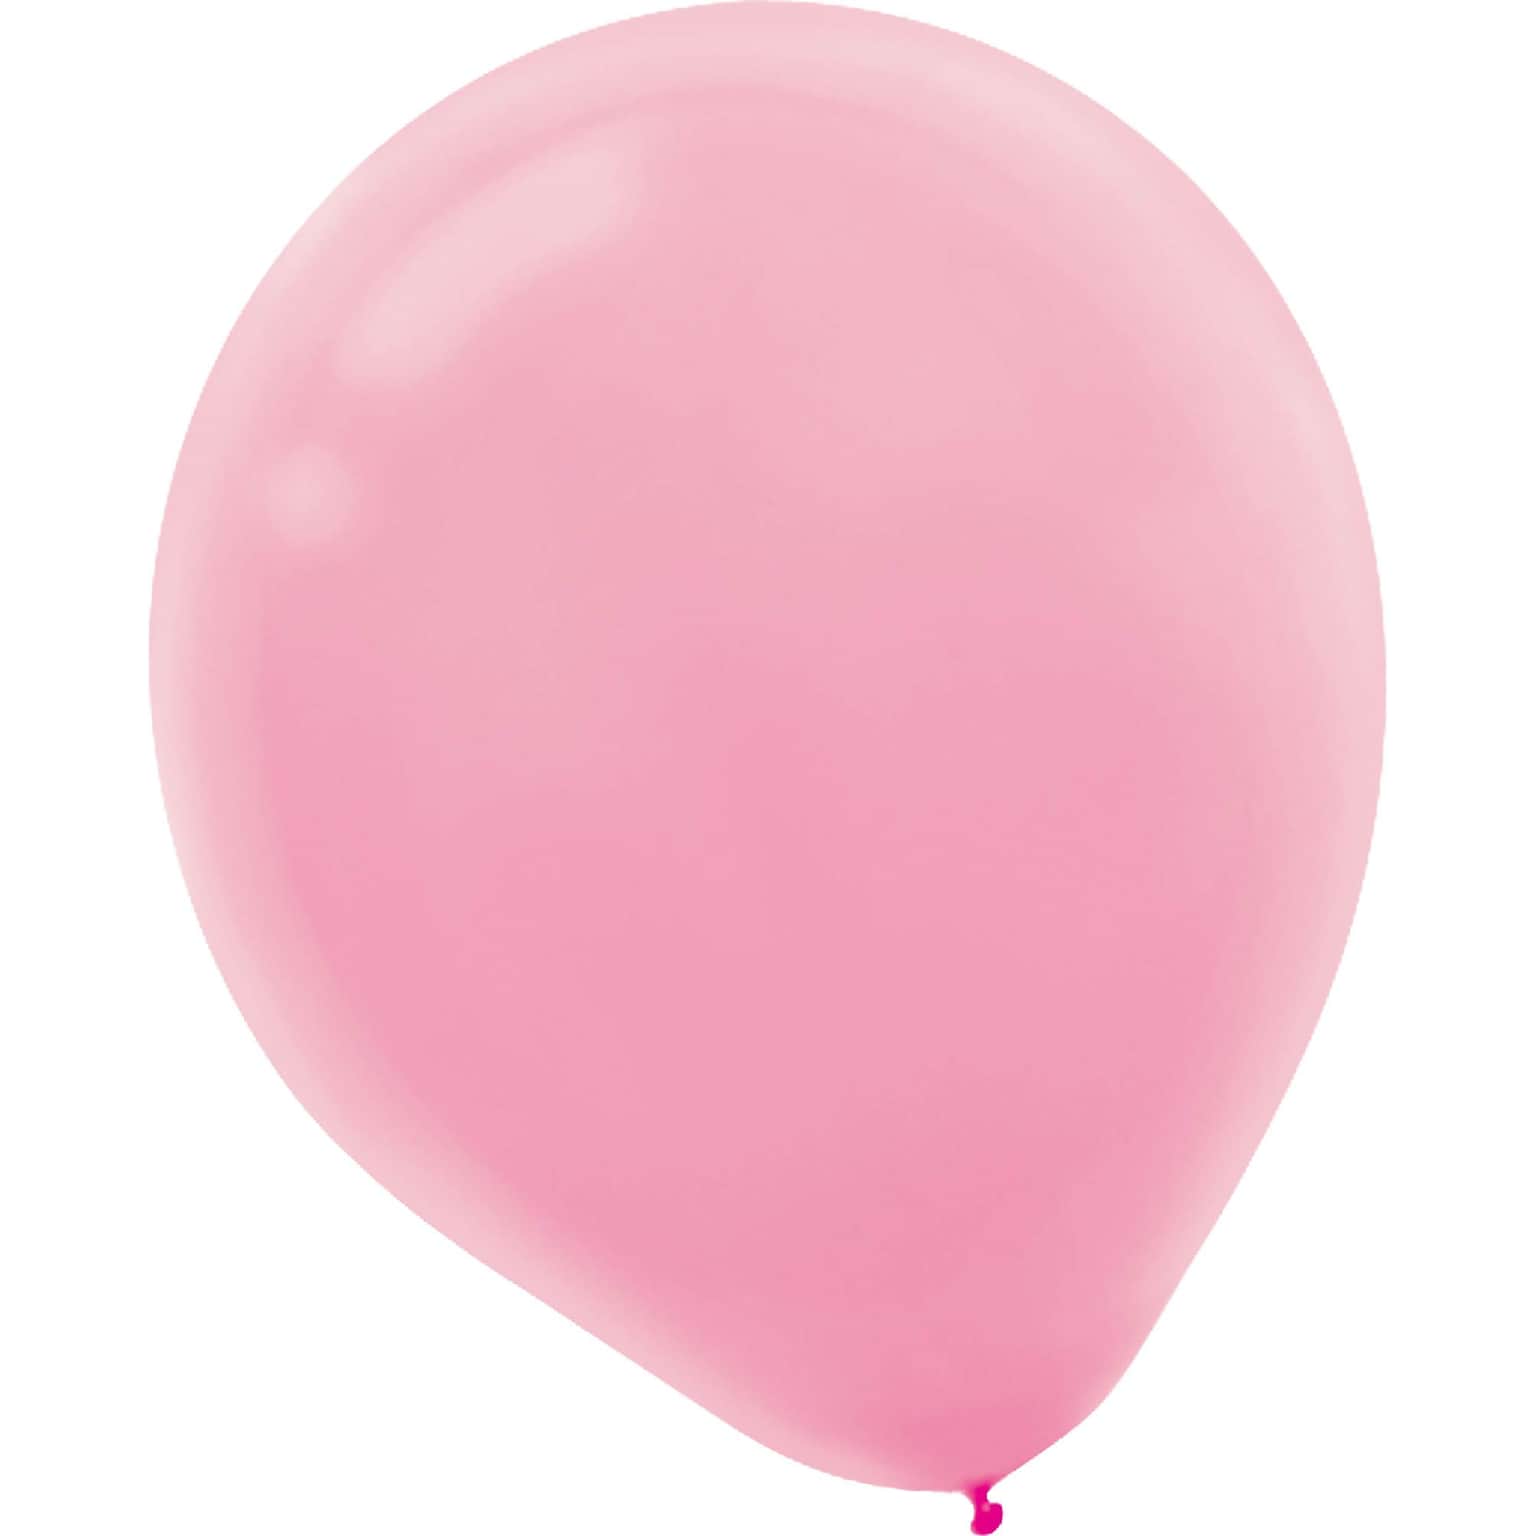 Amscan Solid Color Packaged Latex Balloons, 5, New Pink, 6/Pack, 50 Per Pack (115920.109)